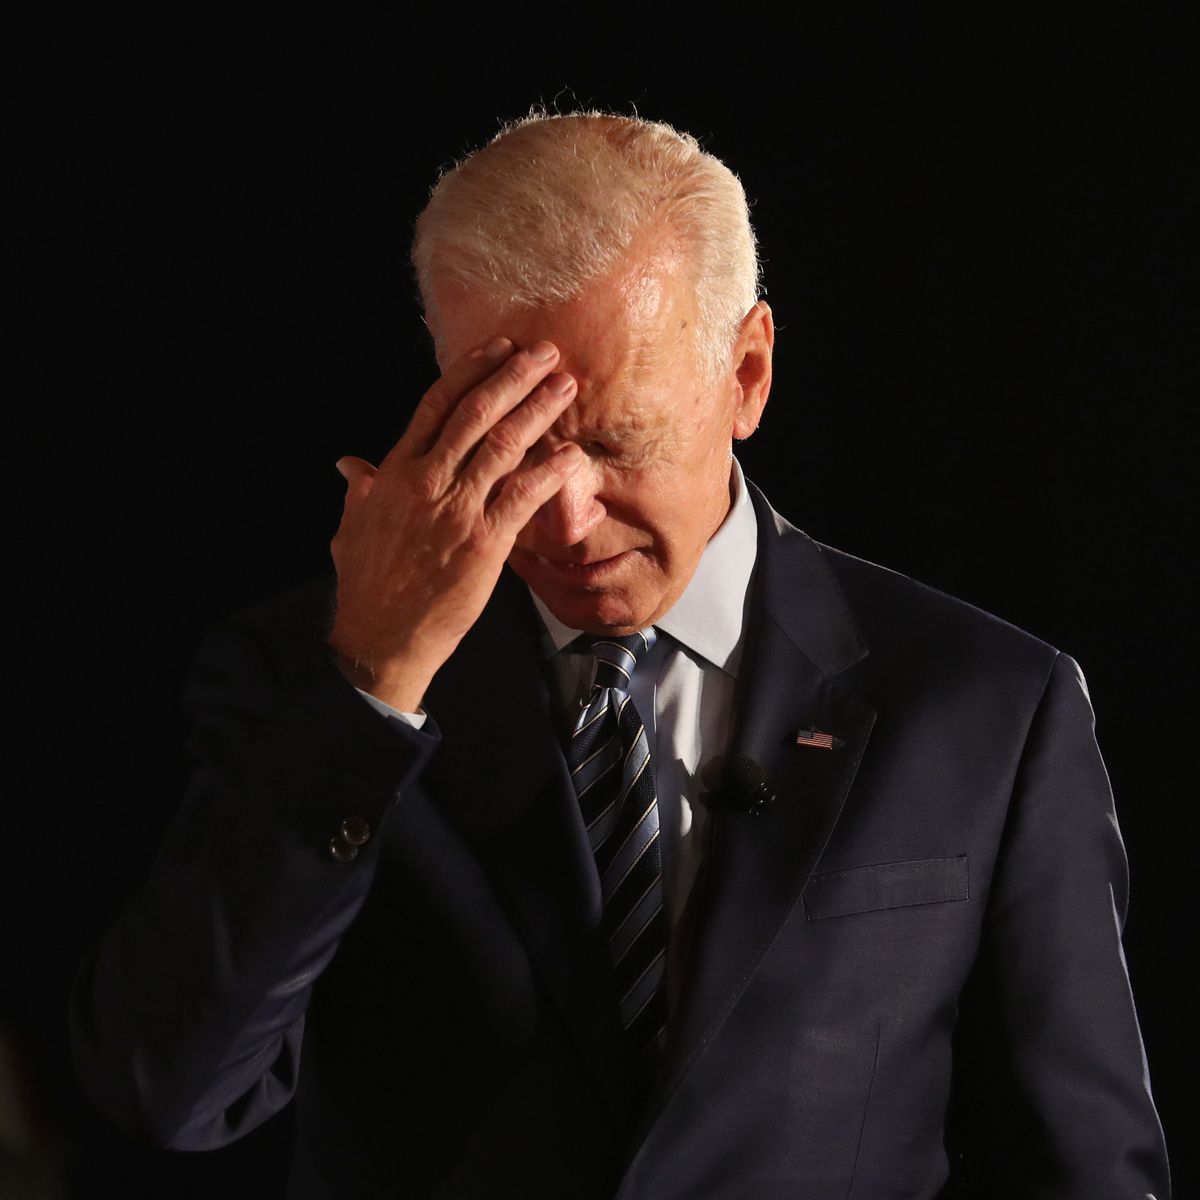 when was joe biden a senator - Biden|President|Joe|Years|Trump|Delaware|Vice|Time|Obama|Senate|States|Law|Age|Campaign|Election|Administration|Family|House|Senator|Office|School|Wife|People|Hunter|University|Act|State|Year|Life|Party|Committee|Children|Beau|Daughter|War|Jill|Day|Facts|Americans|Presidency|Joe Biden|United States|Vice President|White House|Law School|President Trump|Foreign Relations Committee|Donald Trump|President Biden|Presidential Campaign|Presidential Election|Democratic Party|Syracuse University|United Nations|Net Worth|Barack Obama|Judiciary Committee|Neilia Hunter|U.S. Senate|Hillary Clinton|New York Times|Obama Administration|Empty Store Shelves|Systemic Racism|Castle County Council|Archmere Academy|U.S. Senator|Vice Presidency|Second Term|Biden Administration